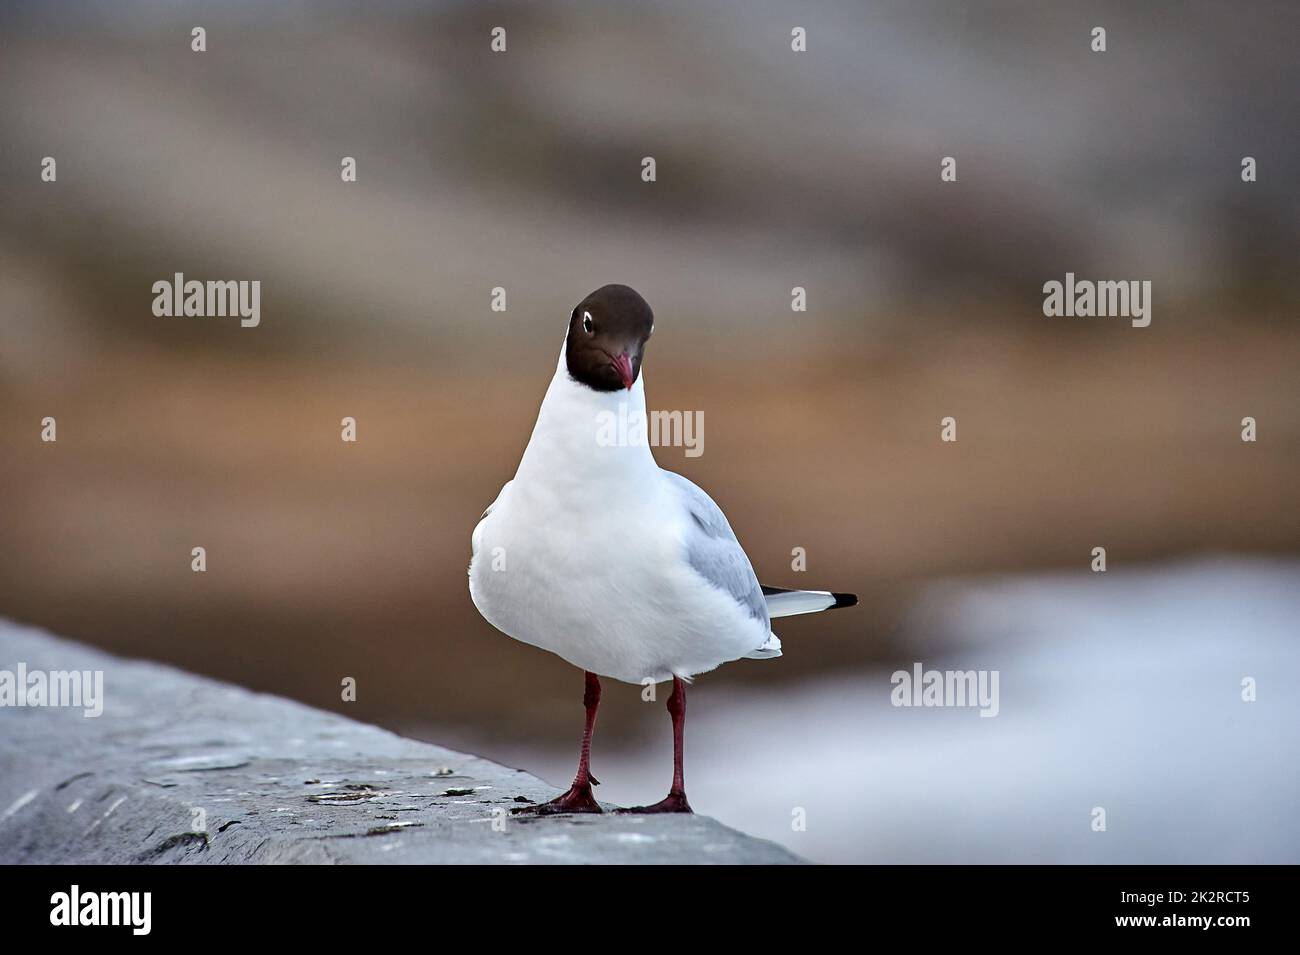 A seagull stands on a gray concrete parapet Stock Photo